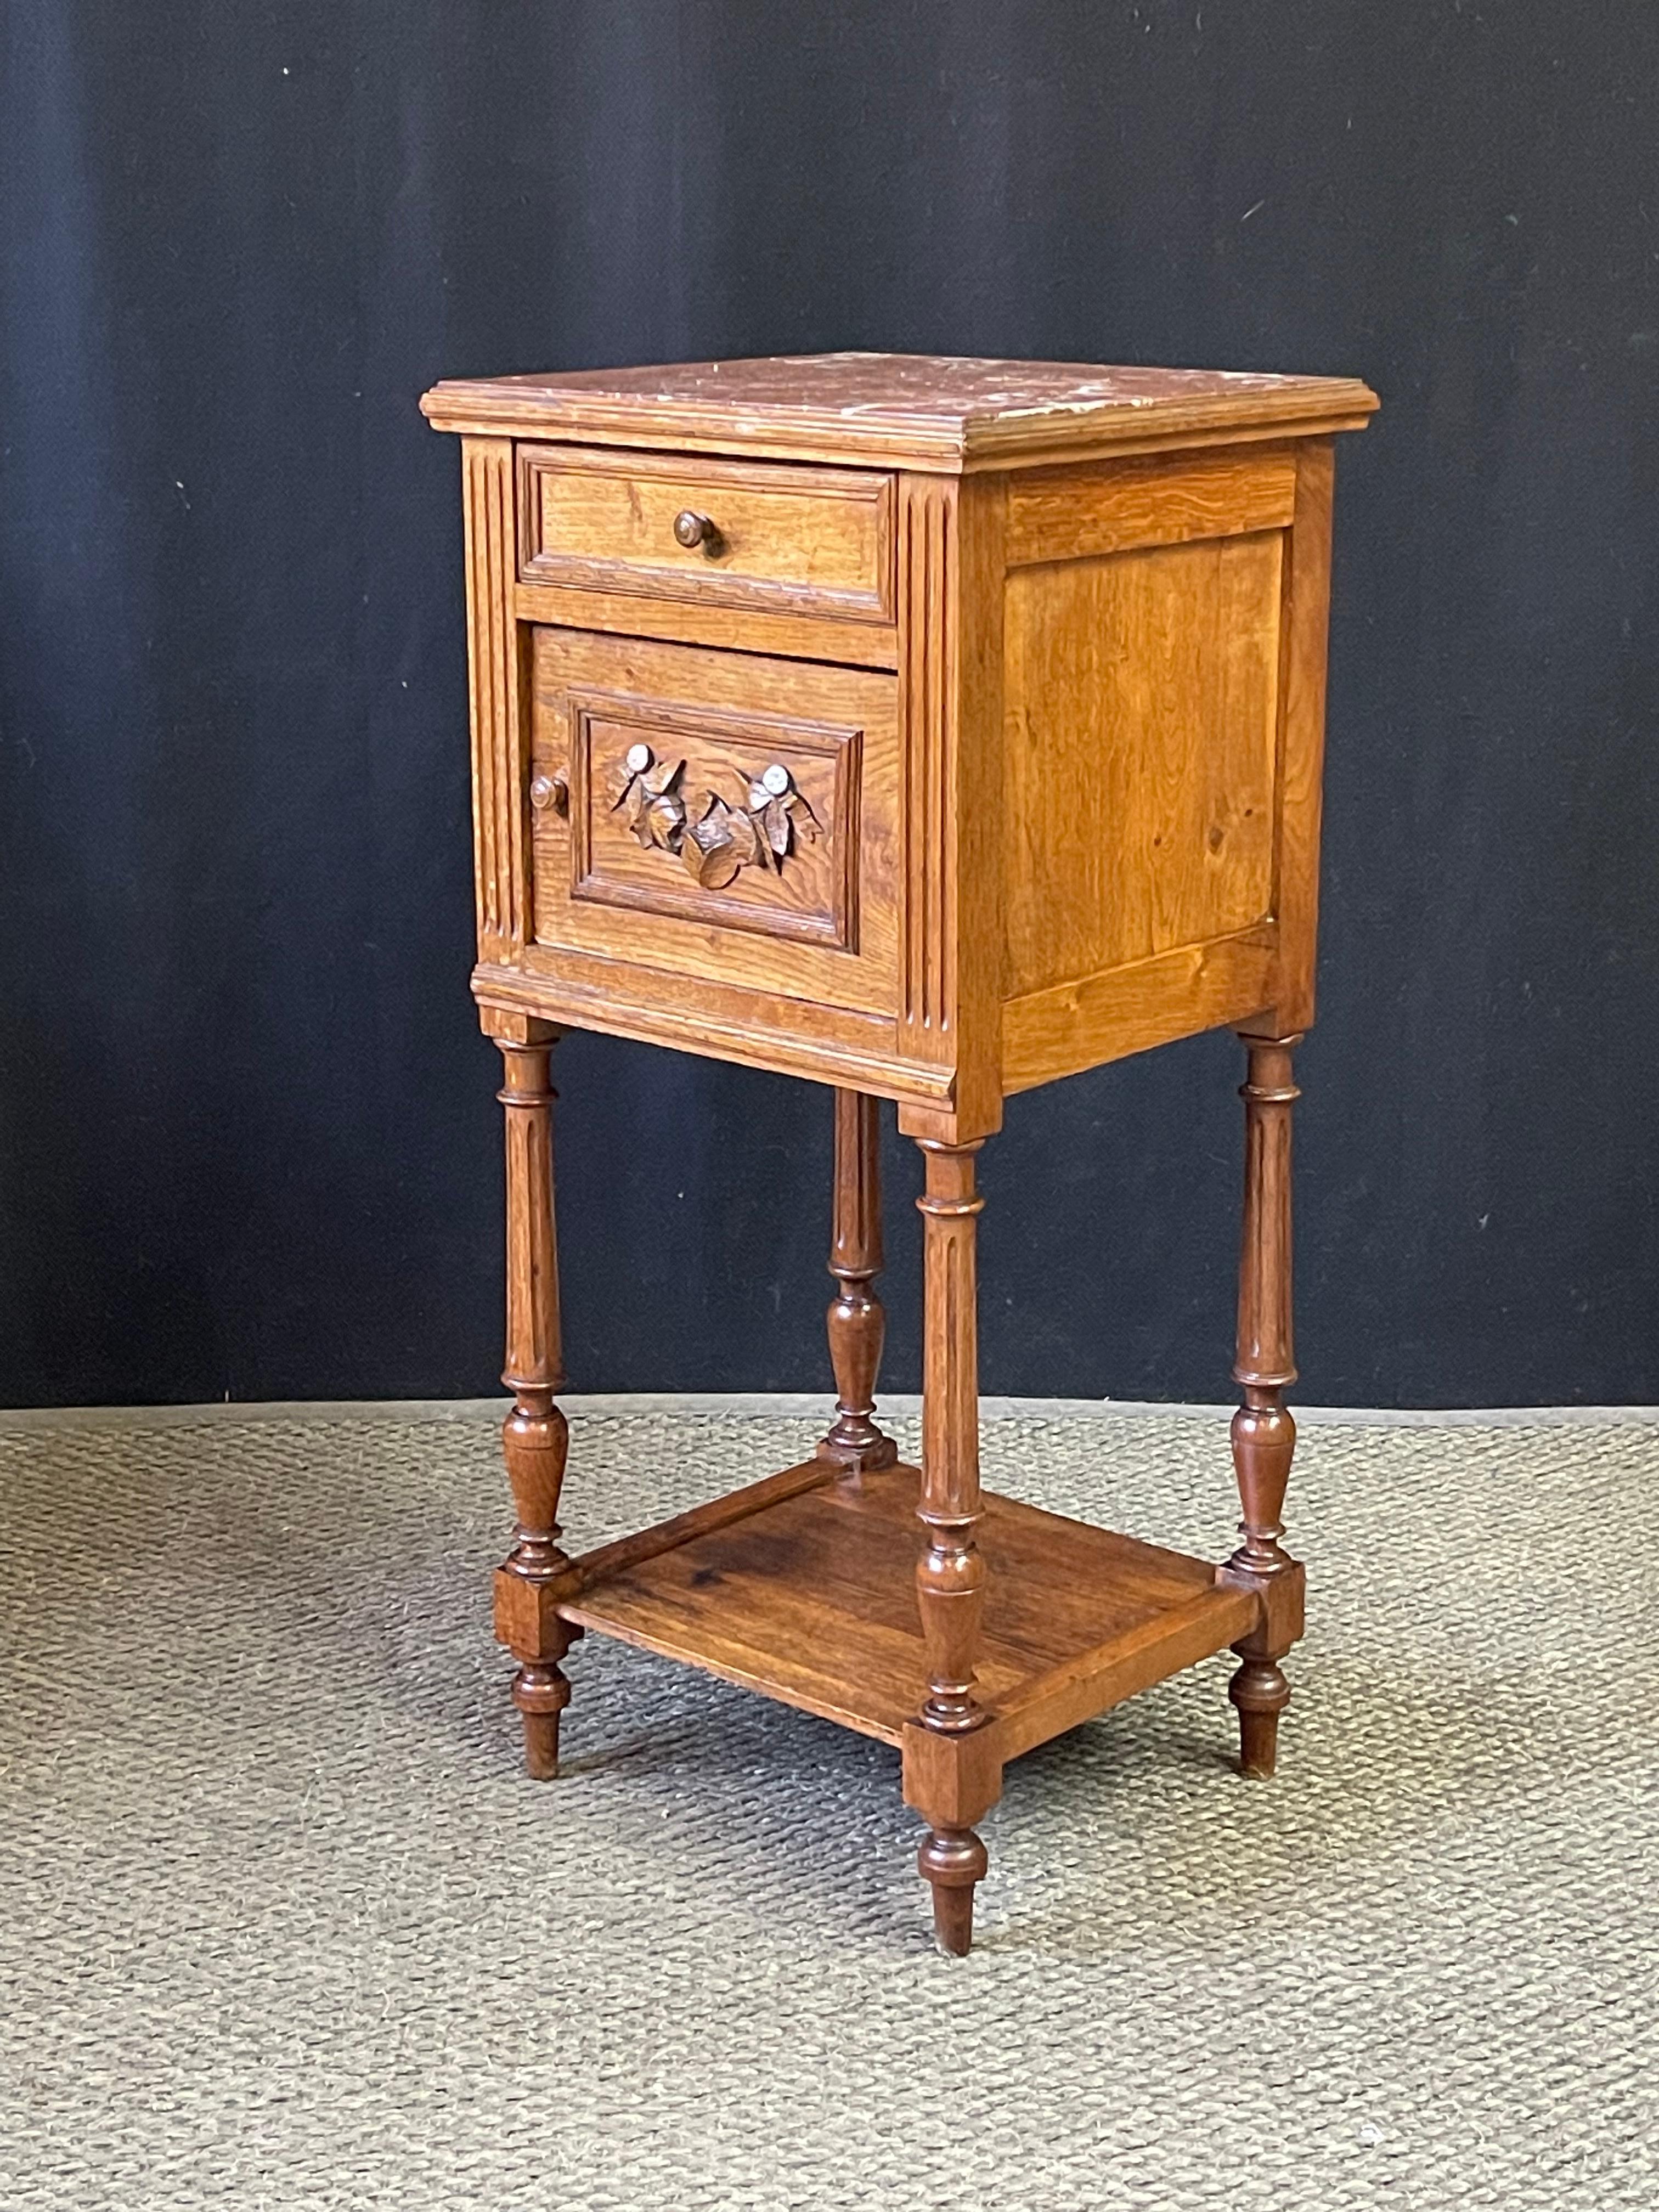 Late 19th Century French bedside table with elegant proportions just right for that place where you need 